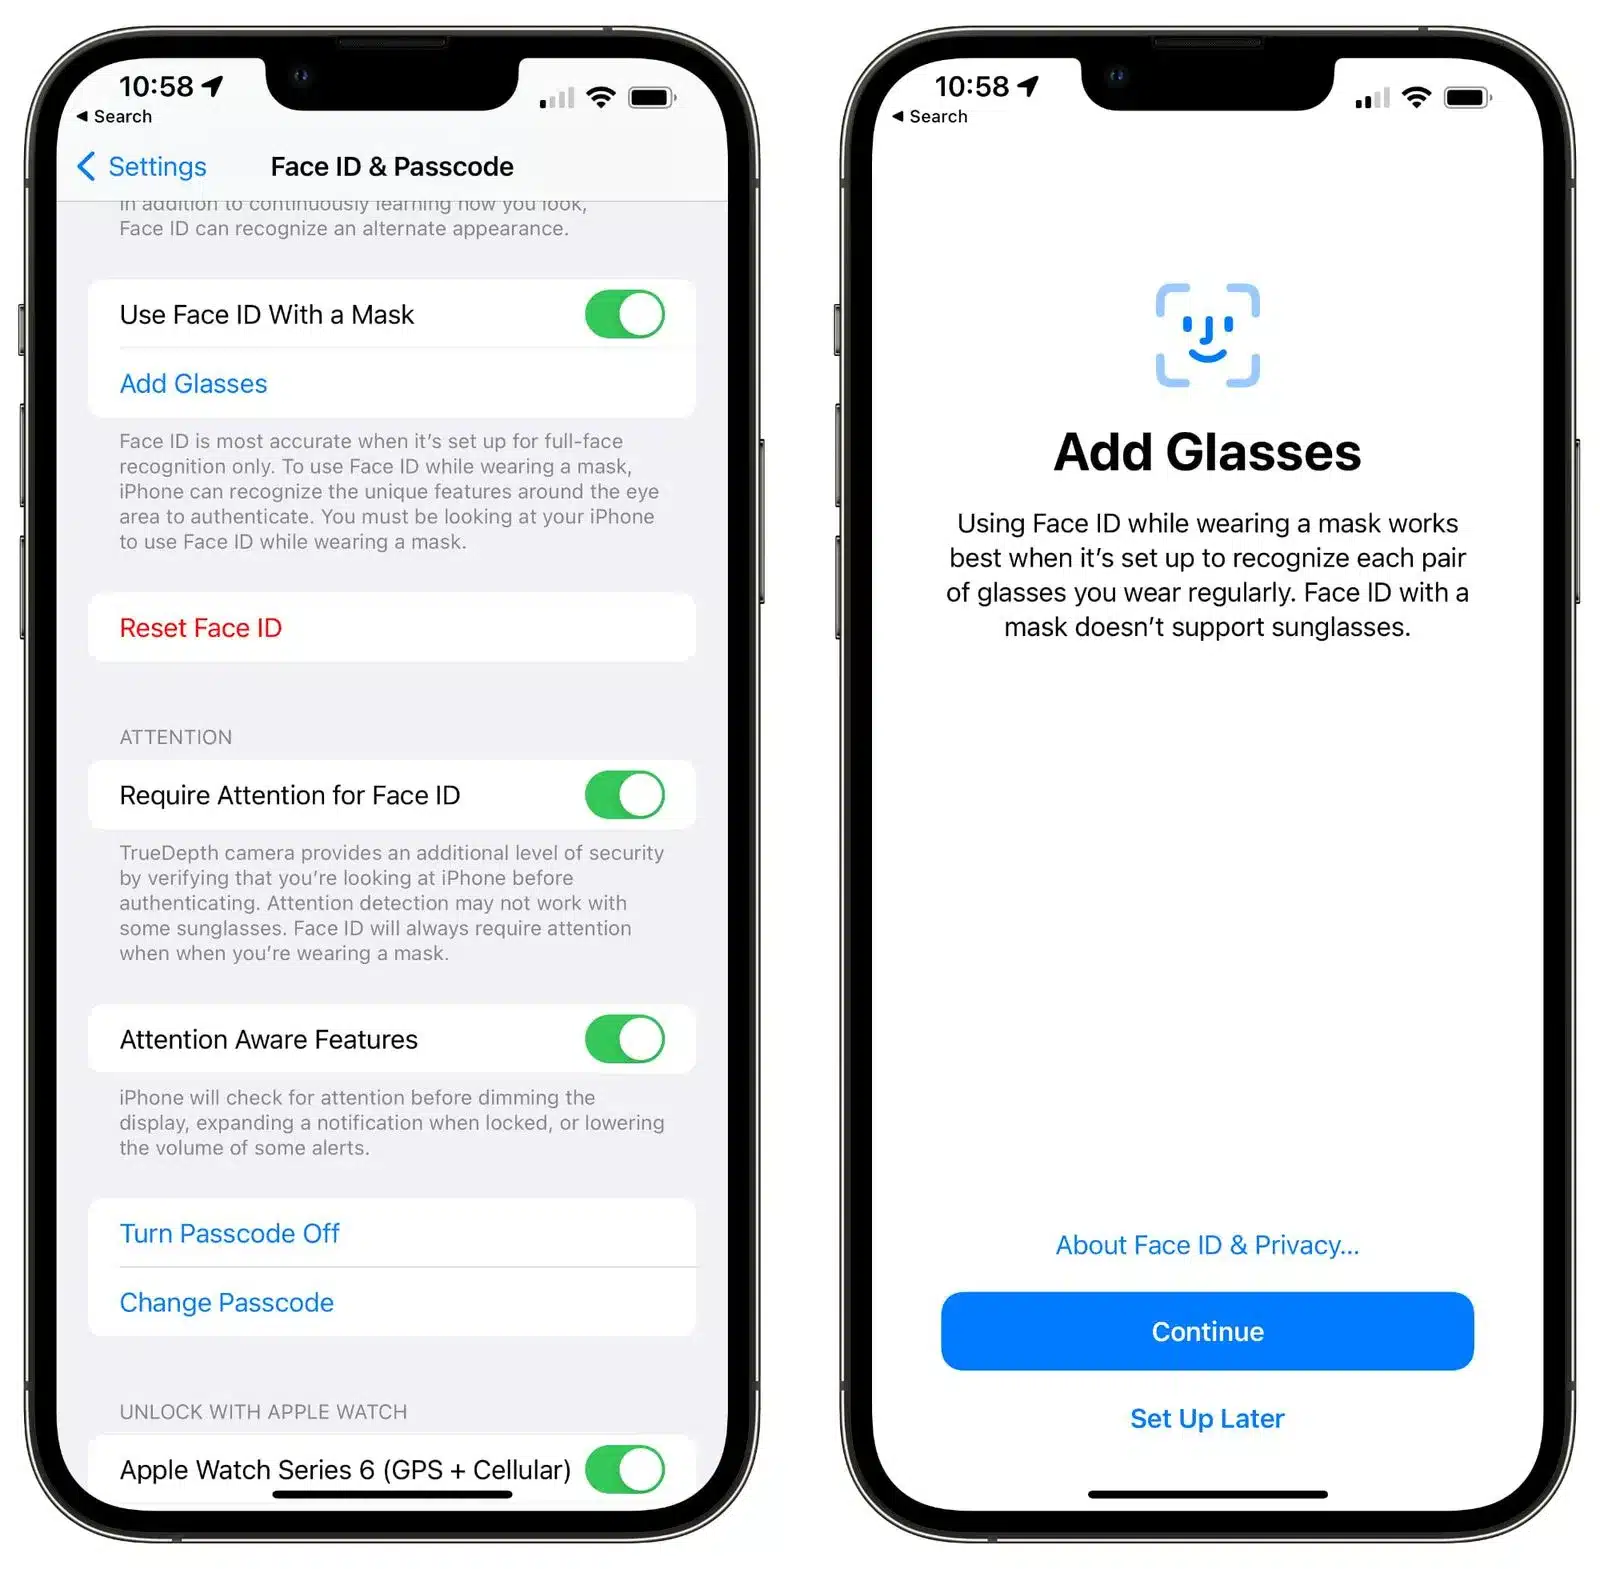 Add Glasses with Face ID on iOS 15.4